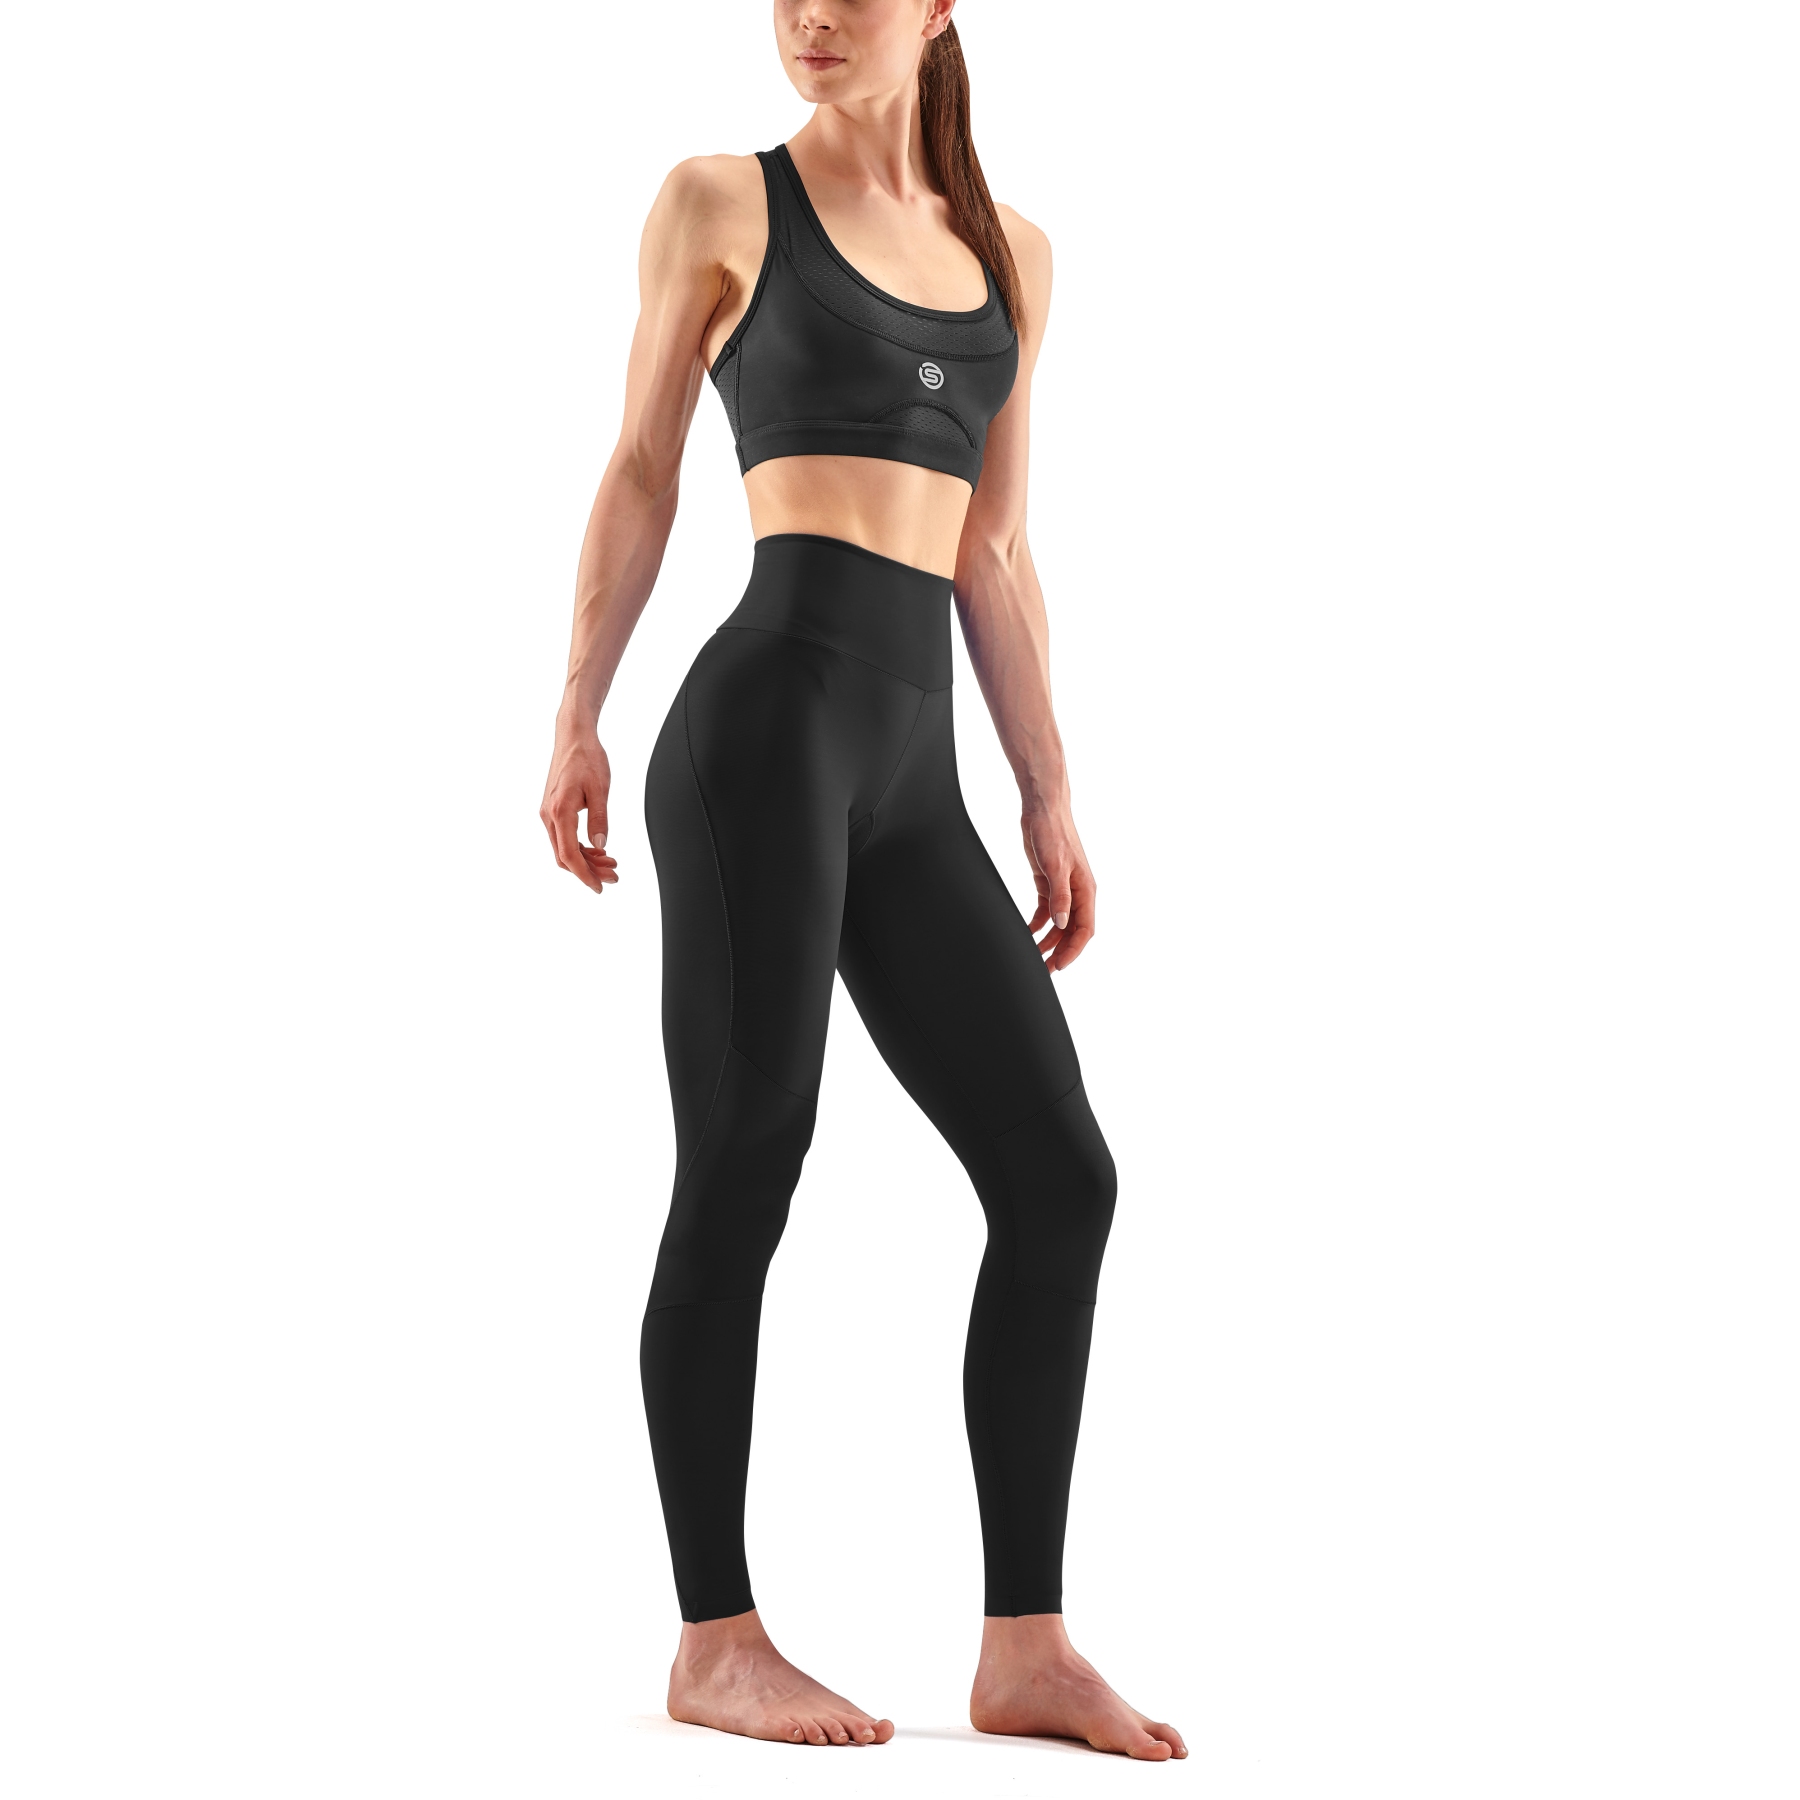 SKINS 5-Series Women's Recovery Long Tights - Black